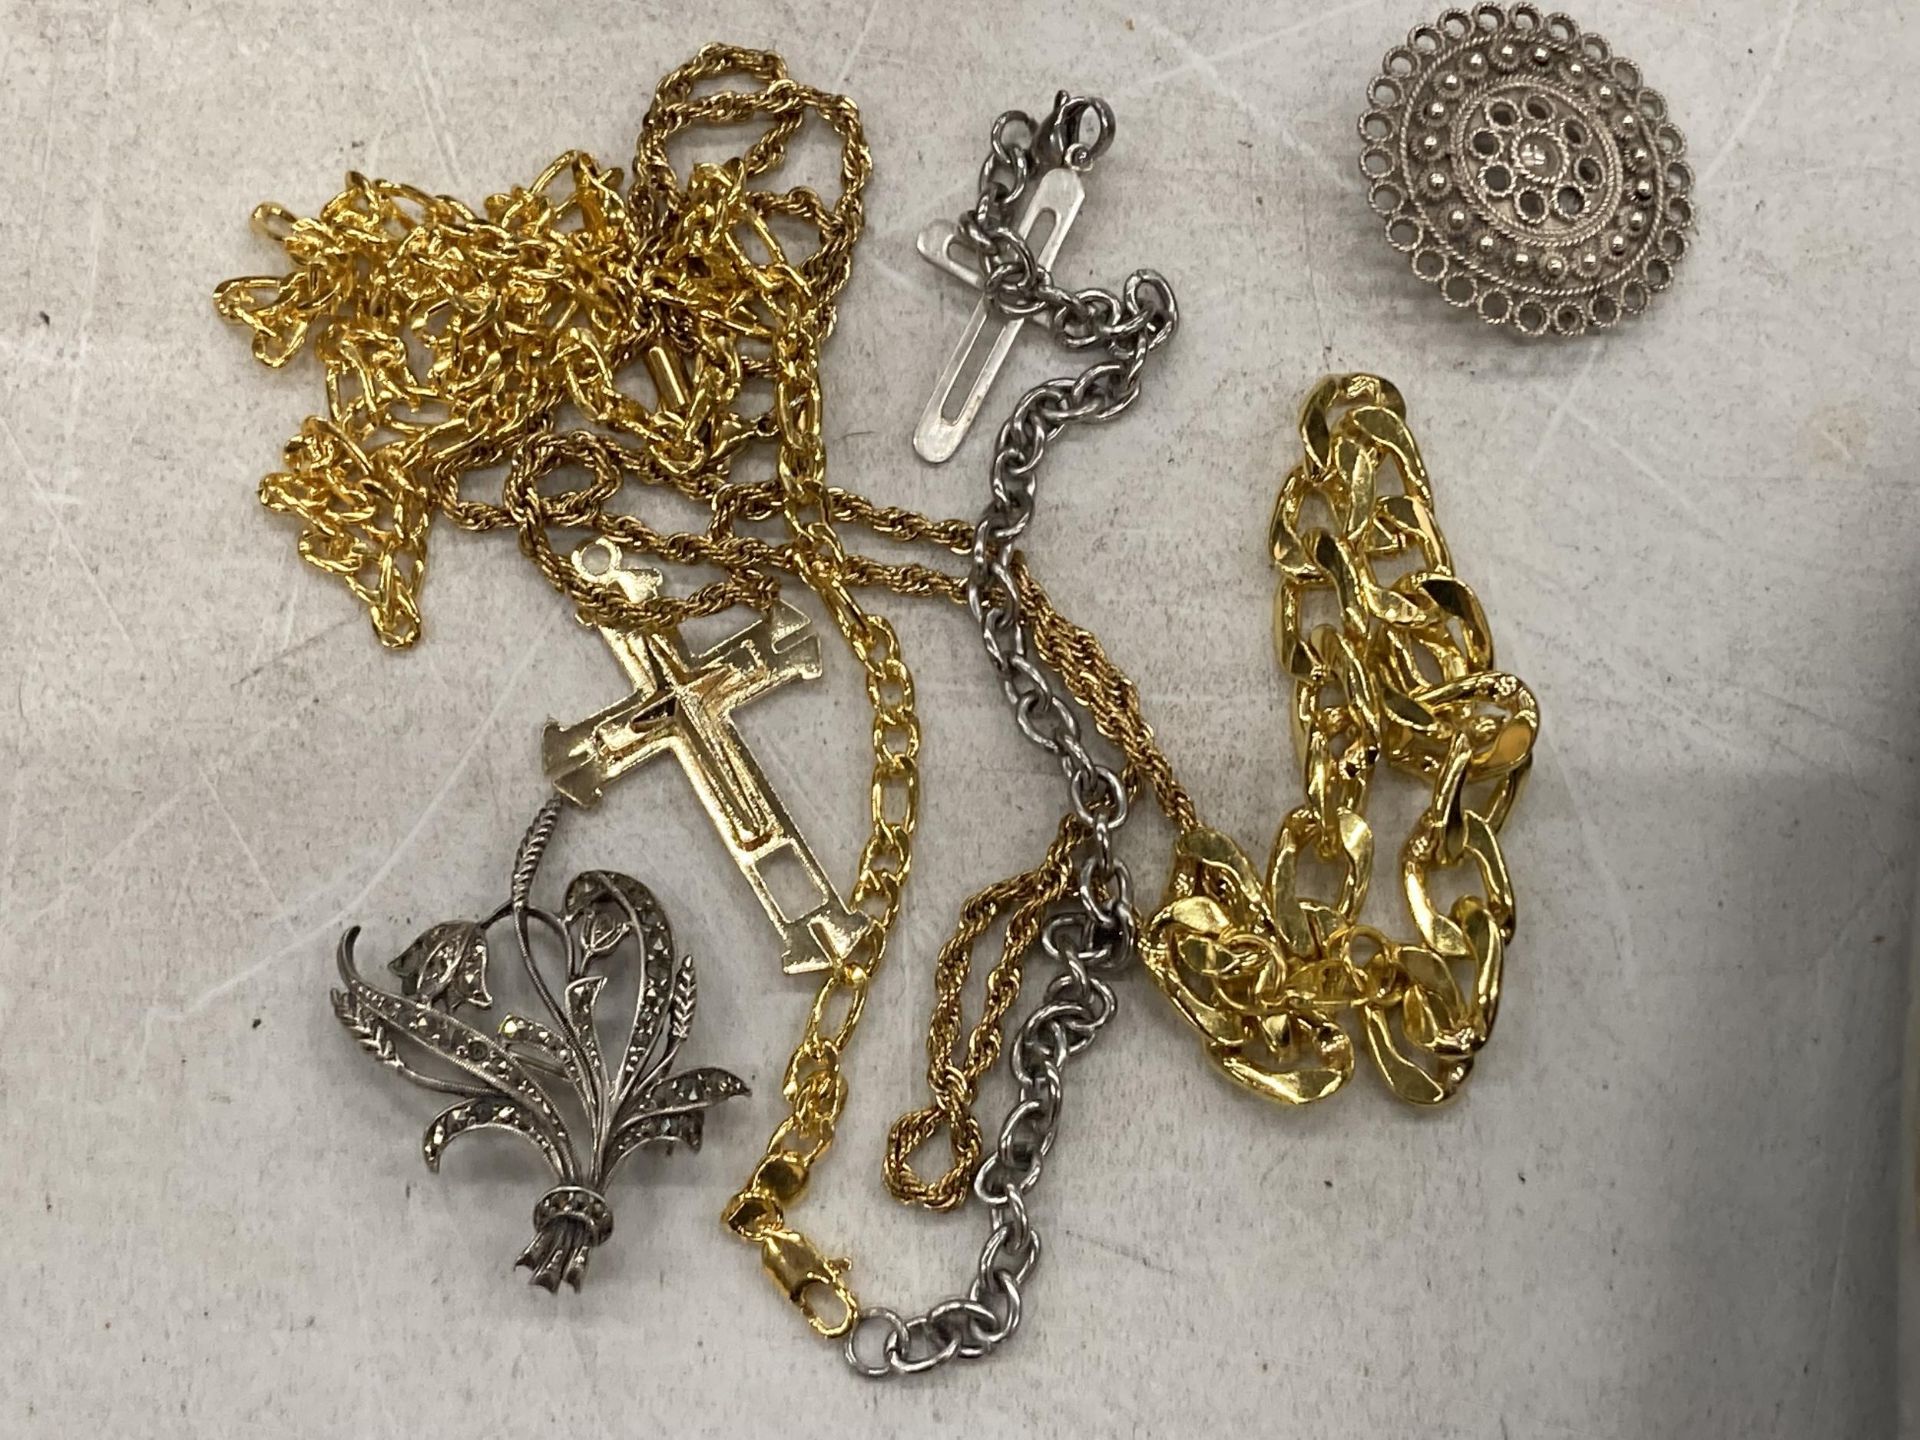 A QUANTITY OF COSTUME JEWELLERY TO INCLUDE 2 CROSSES, 2 FILIGREE BROOCHES, 2 NECKLACES AND A